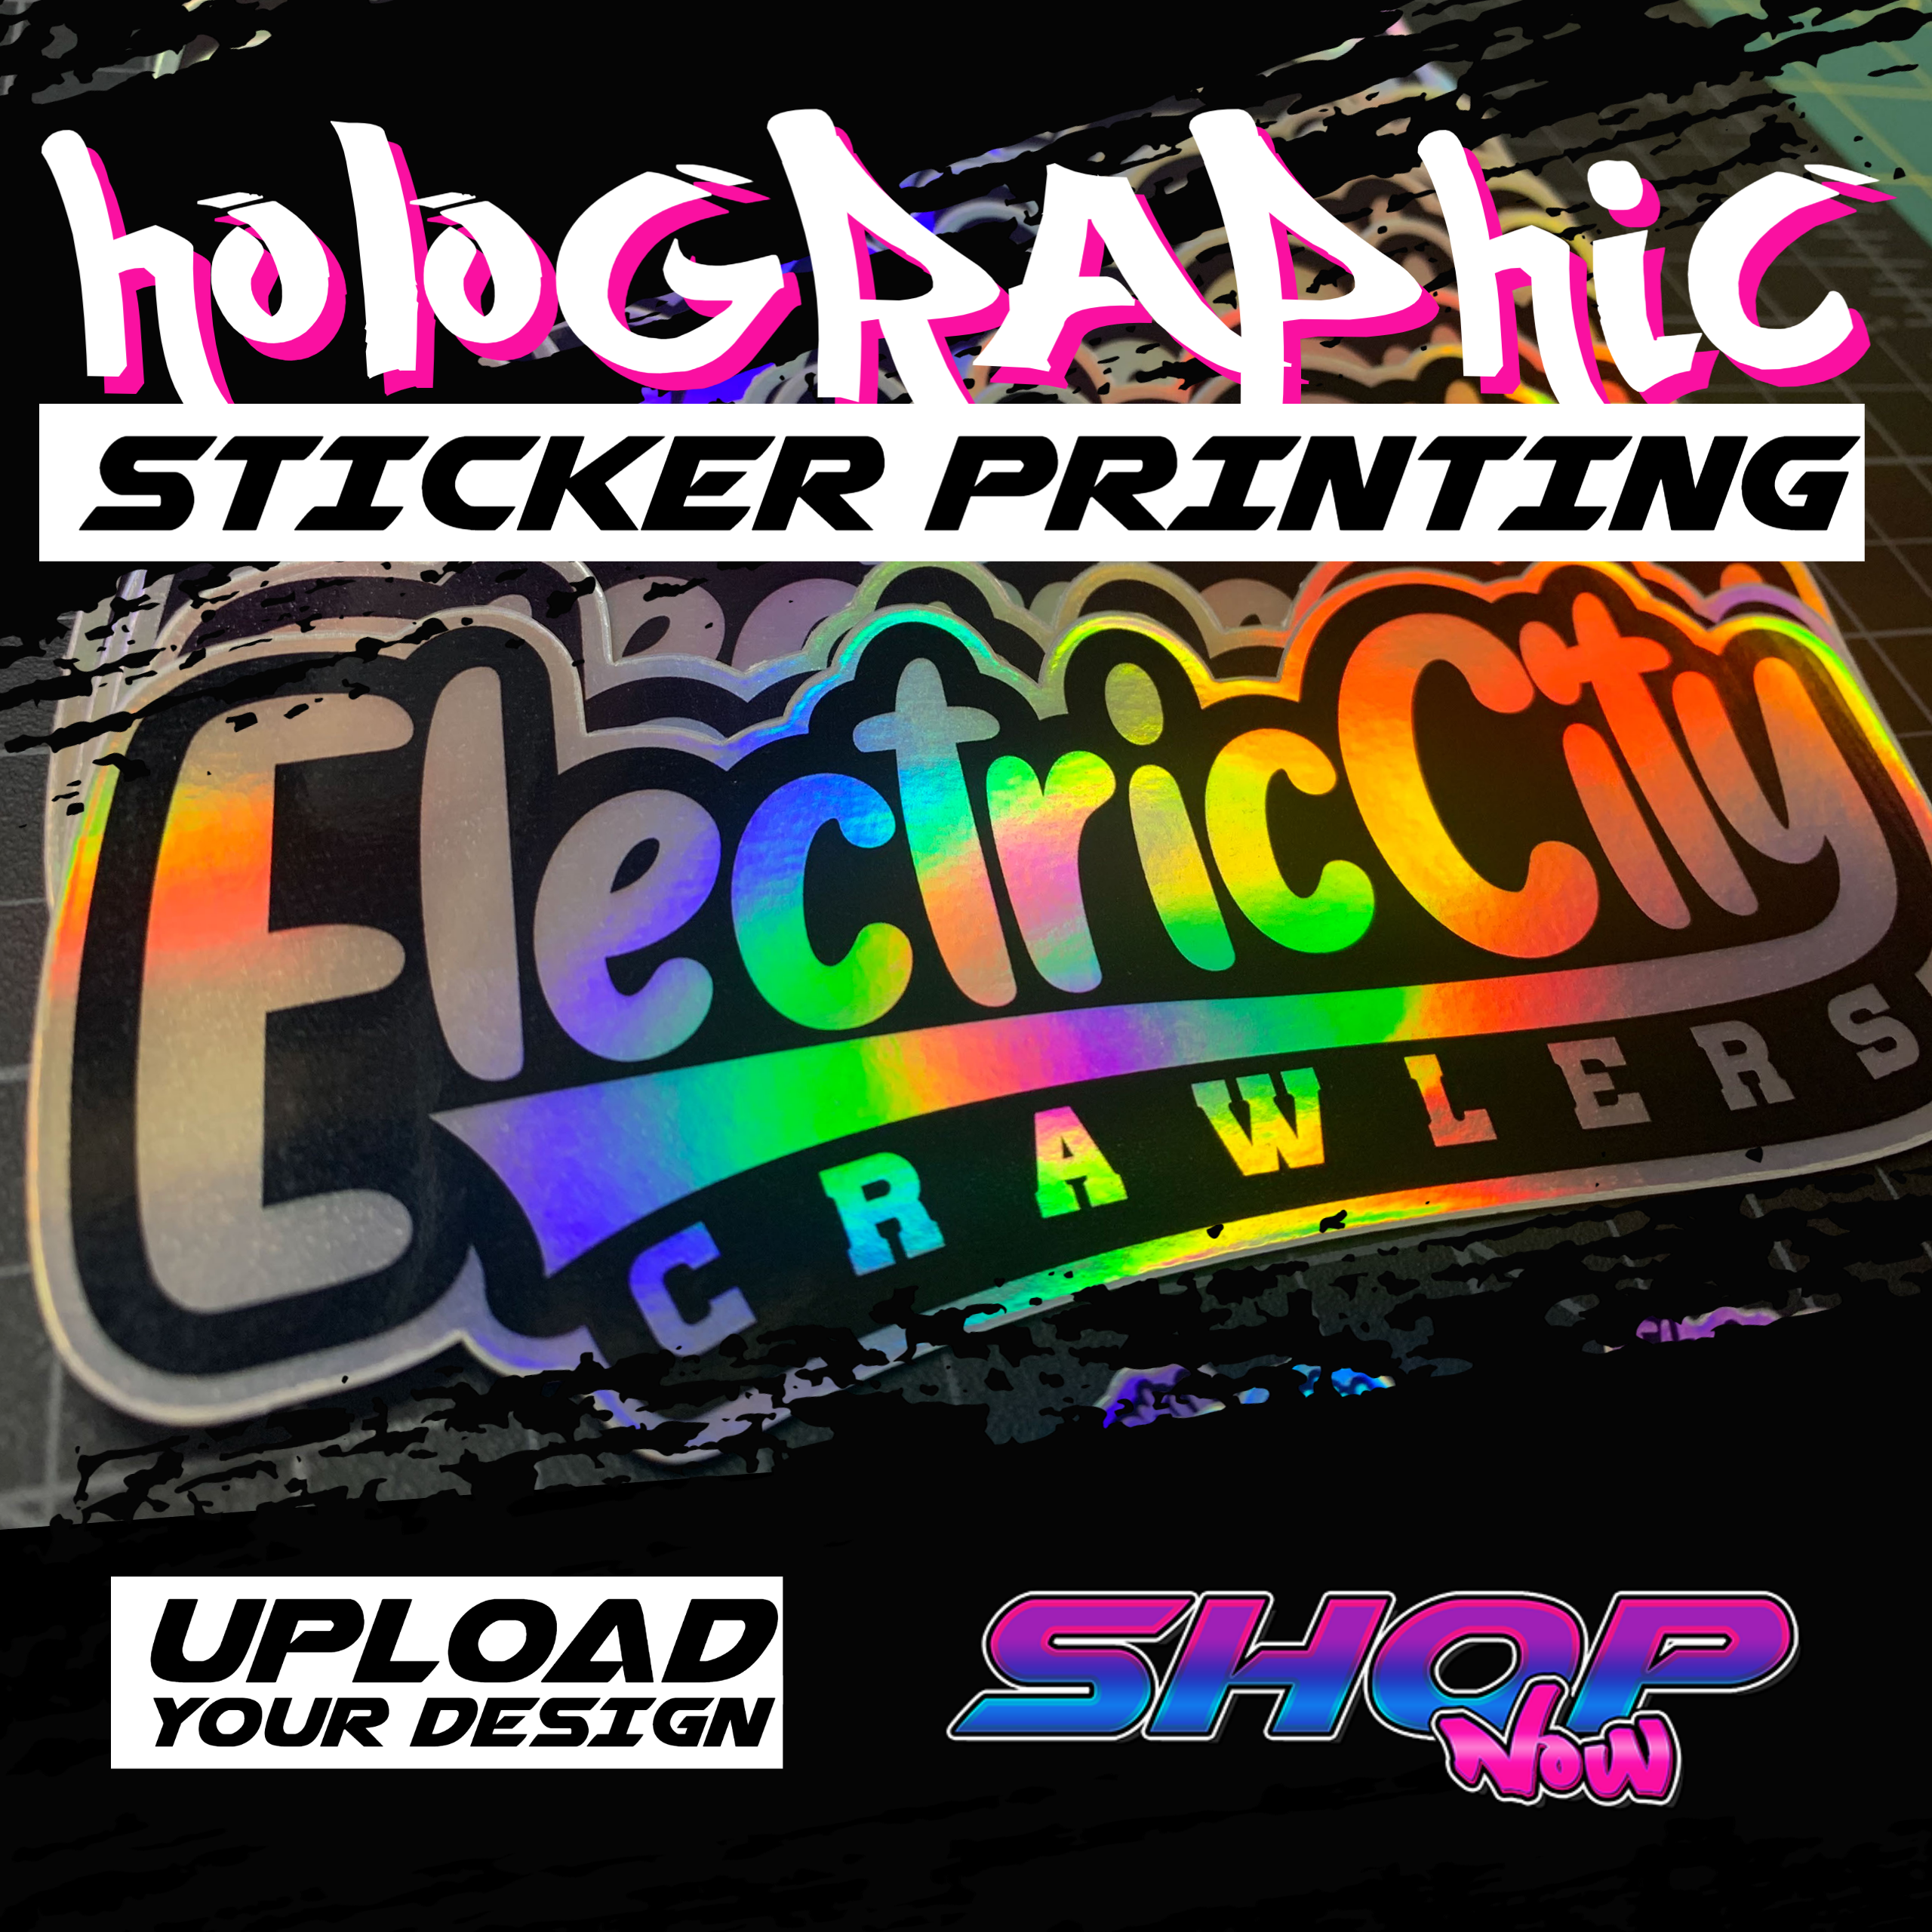 https://rcswag.com/wp-content/uploads/2021/04/Holographic-Sticker-Printing-by-RC-SWAG.png